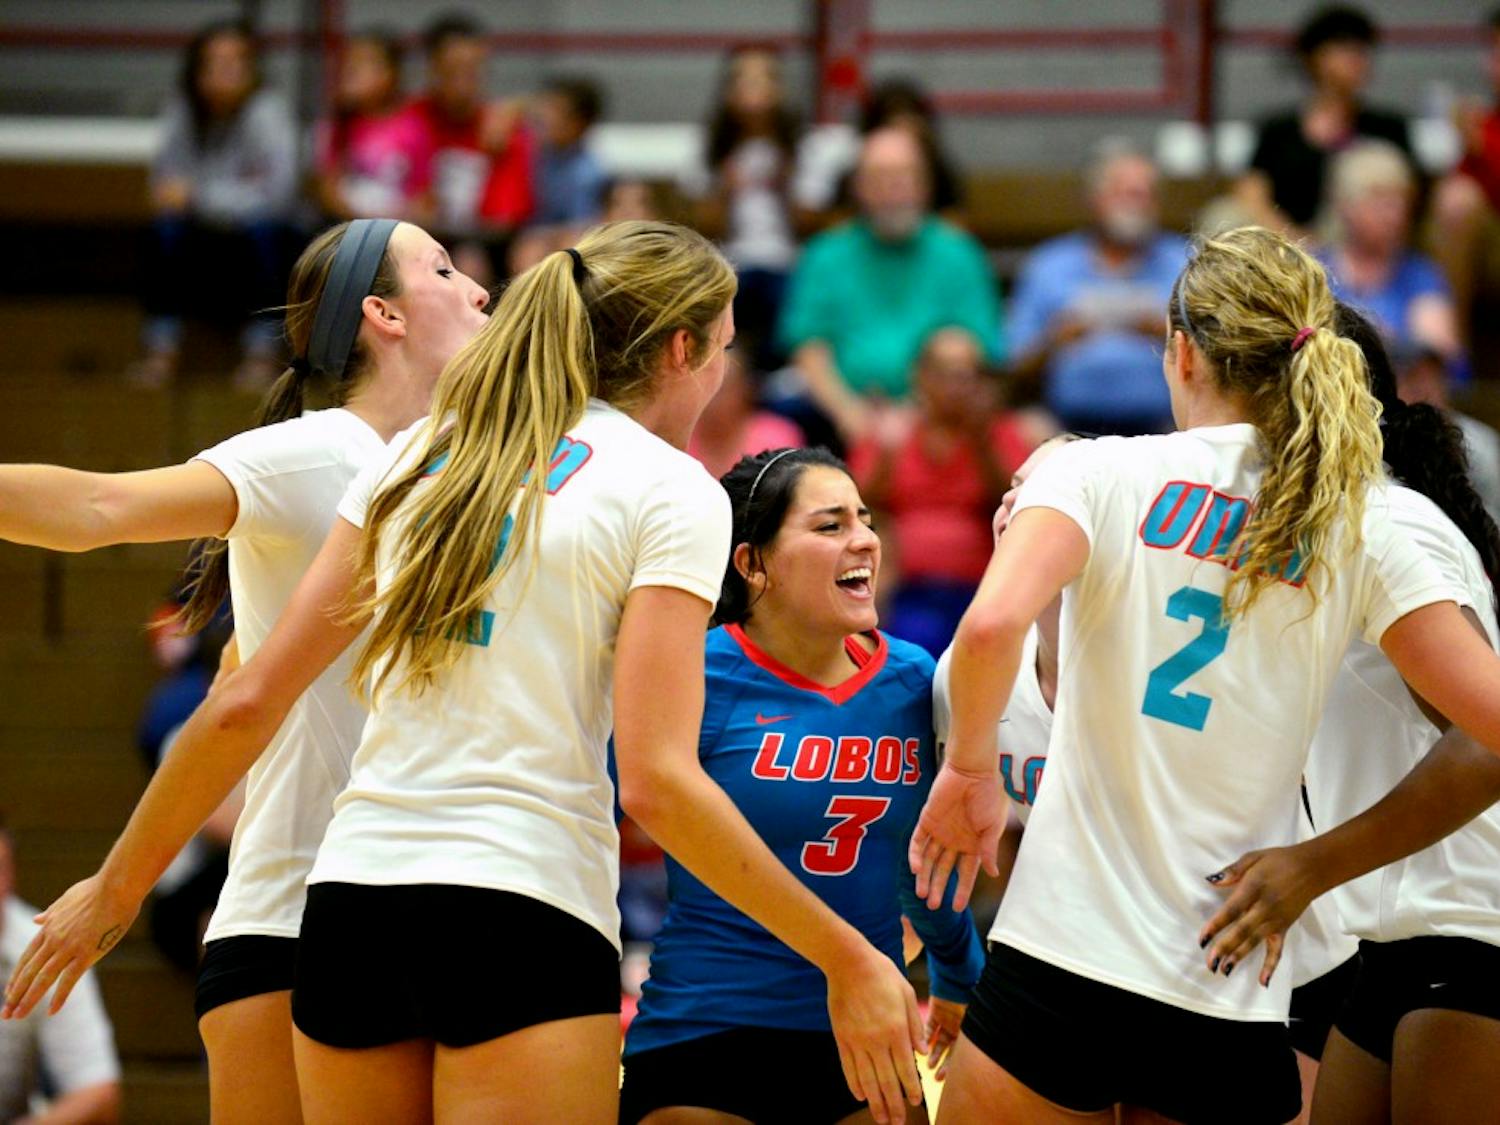 UNM libero Mercedes Pacheco is surrounded by her teammates after scoring a point against Santa Clara on Sept. 4. As a defensive specialist, Pacheco’s role for the Lobos is a key one for the team.